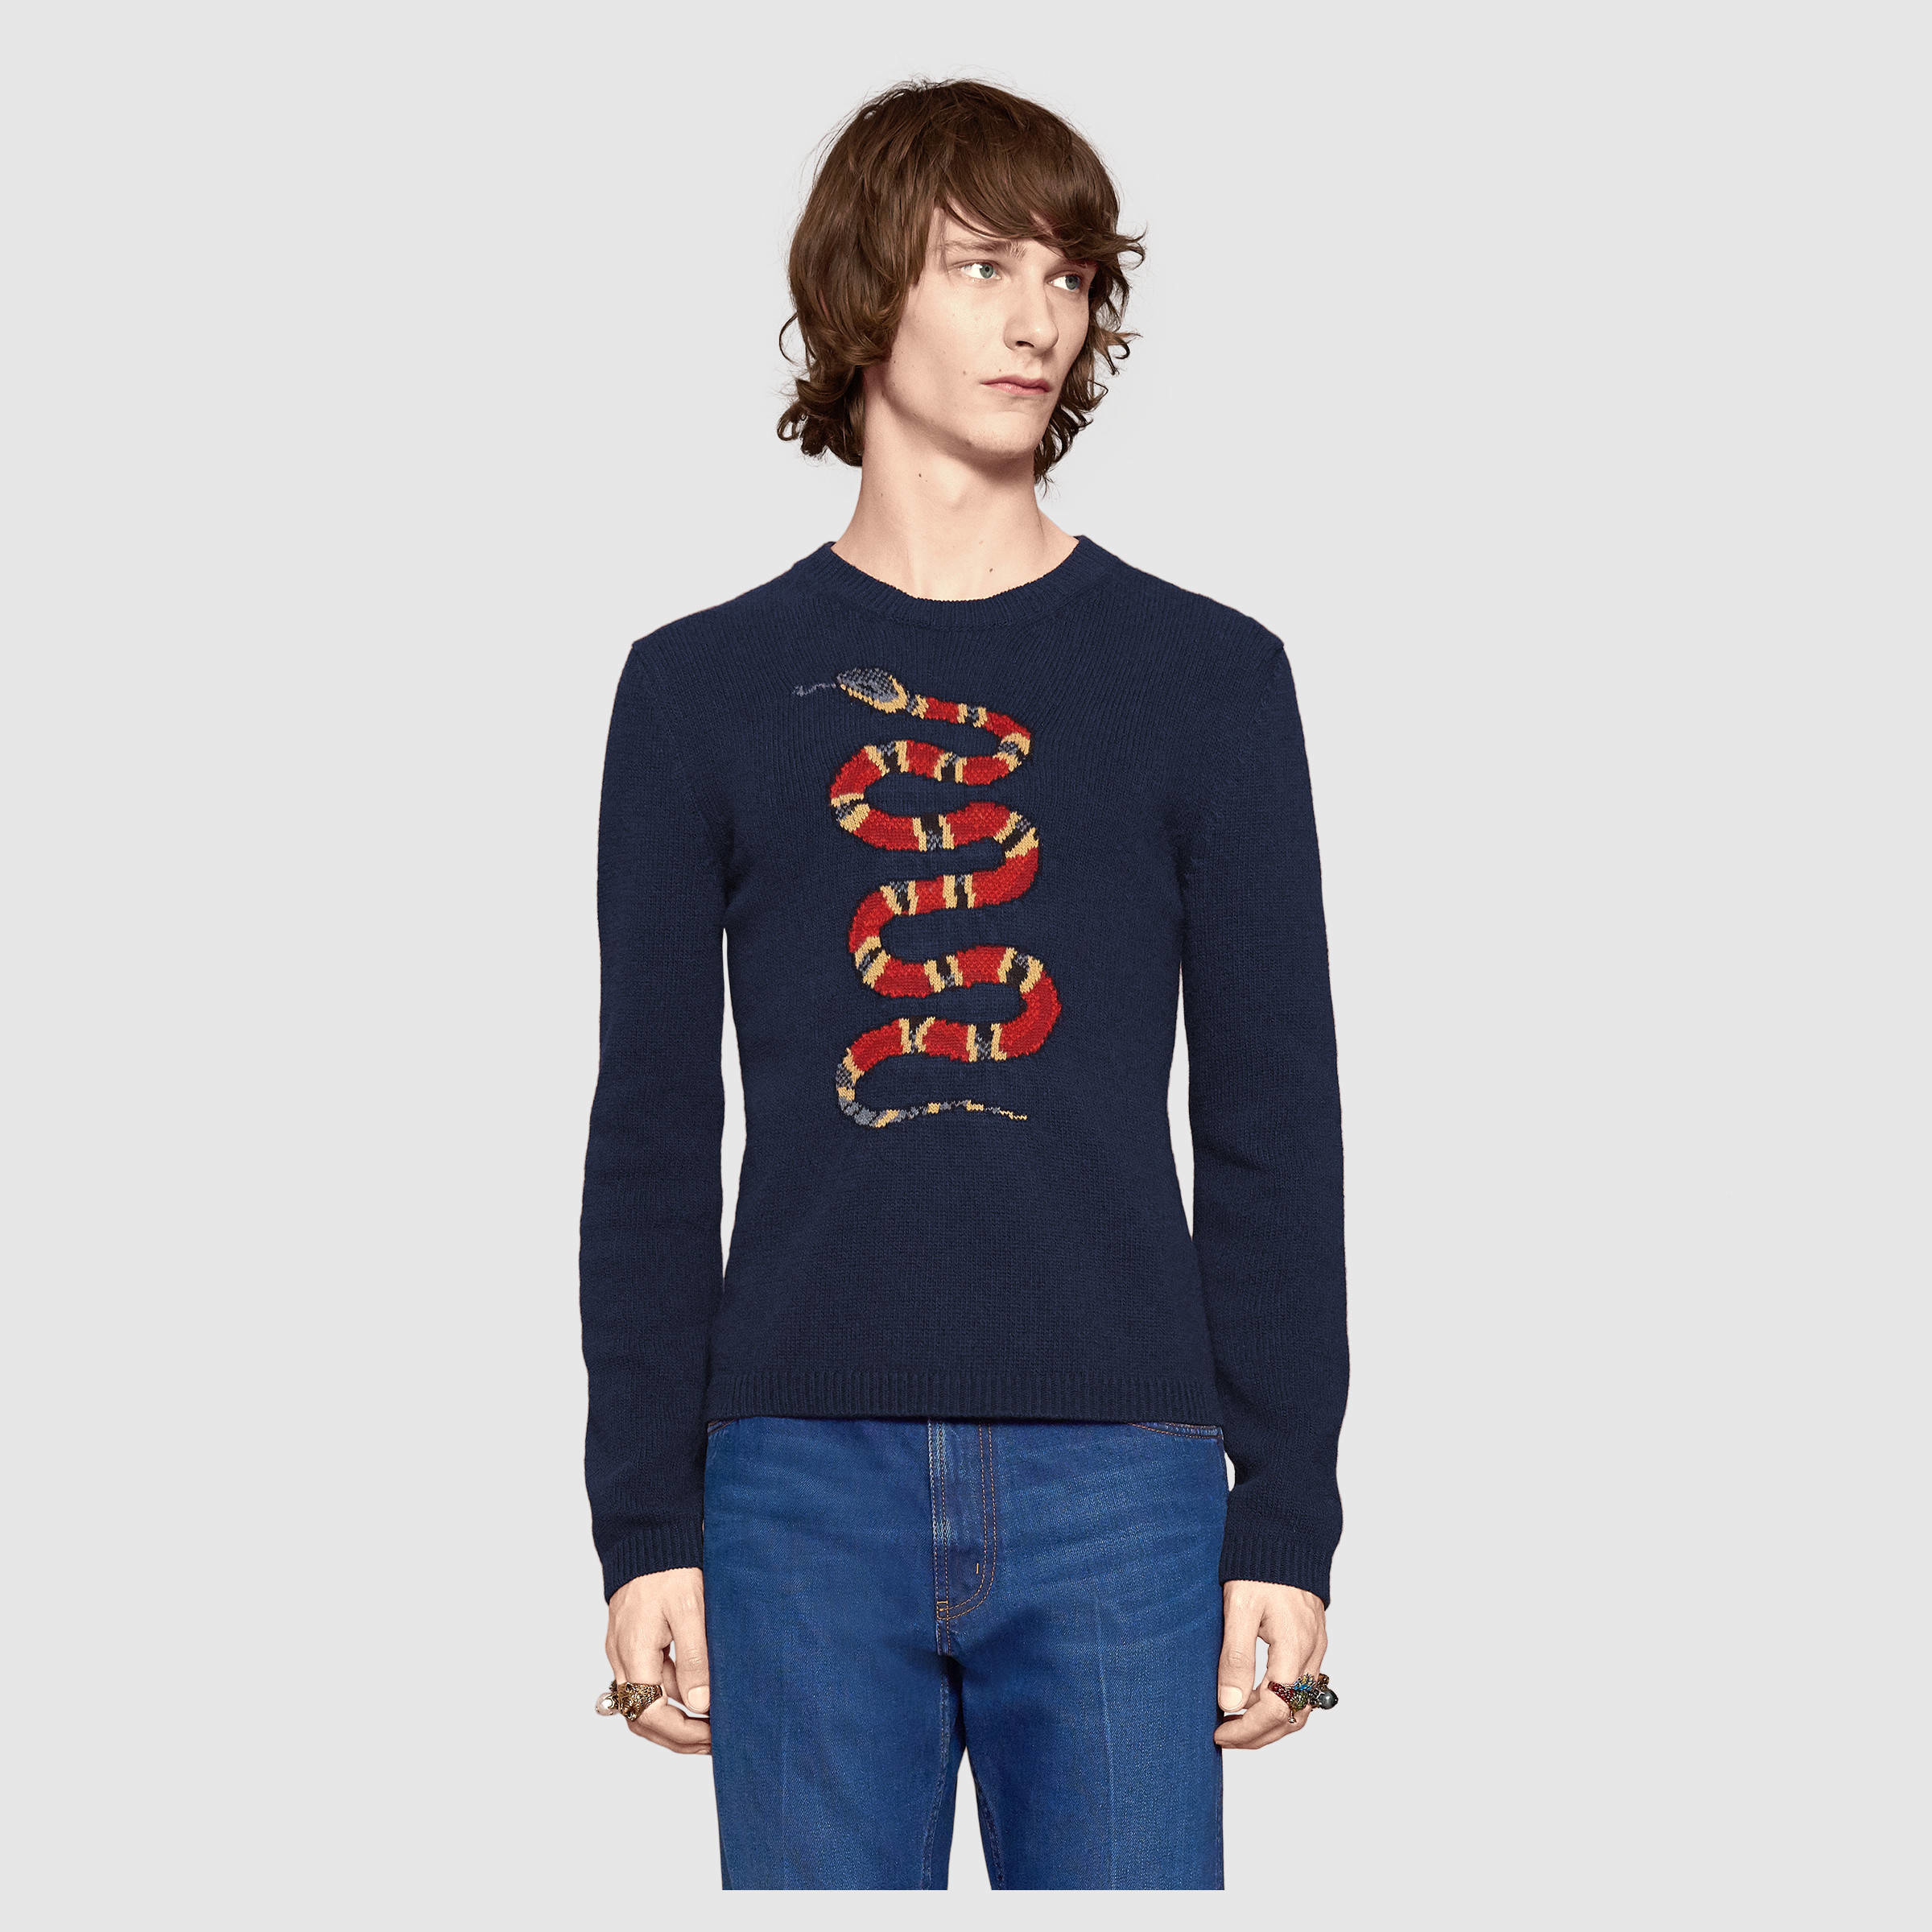 Gucci Snake Jacquard Wool Sweater in Blue for Men - Lyst